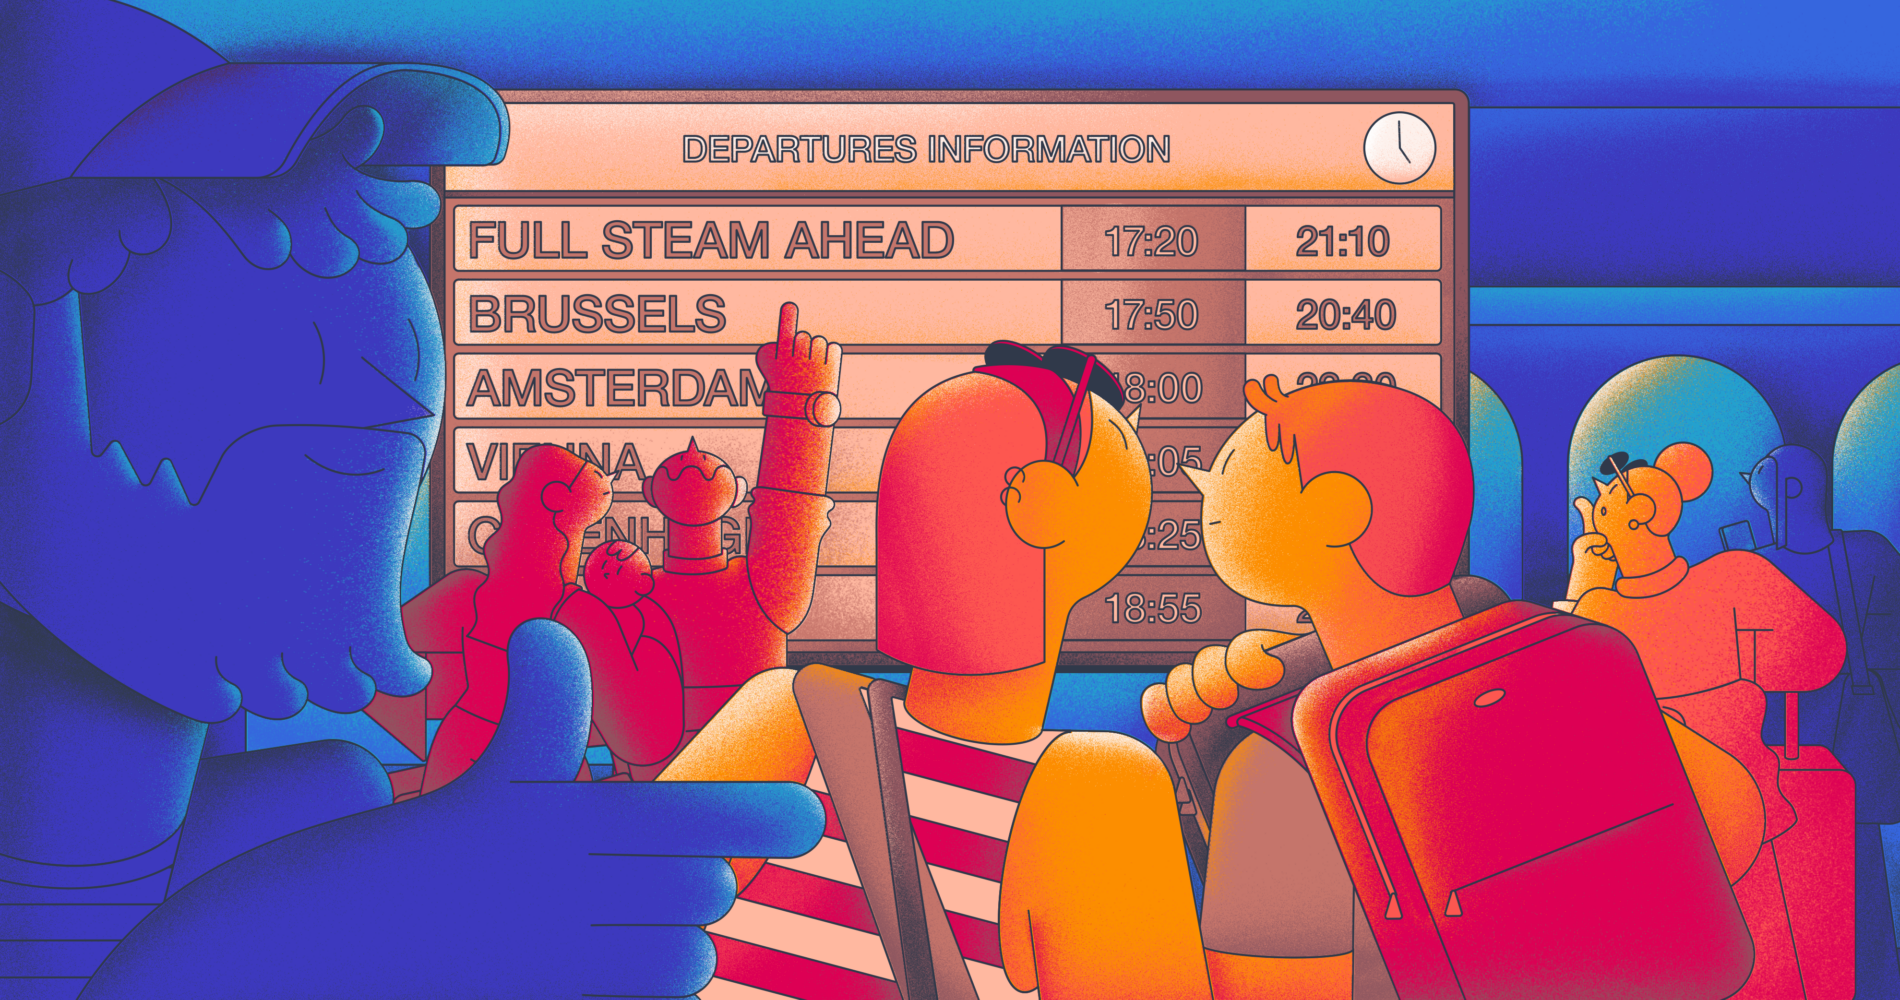 graphic illustration of people around a departures board